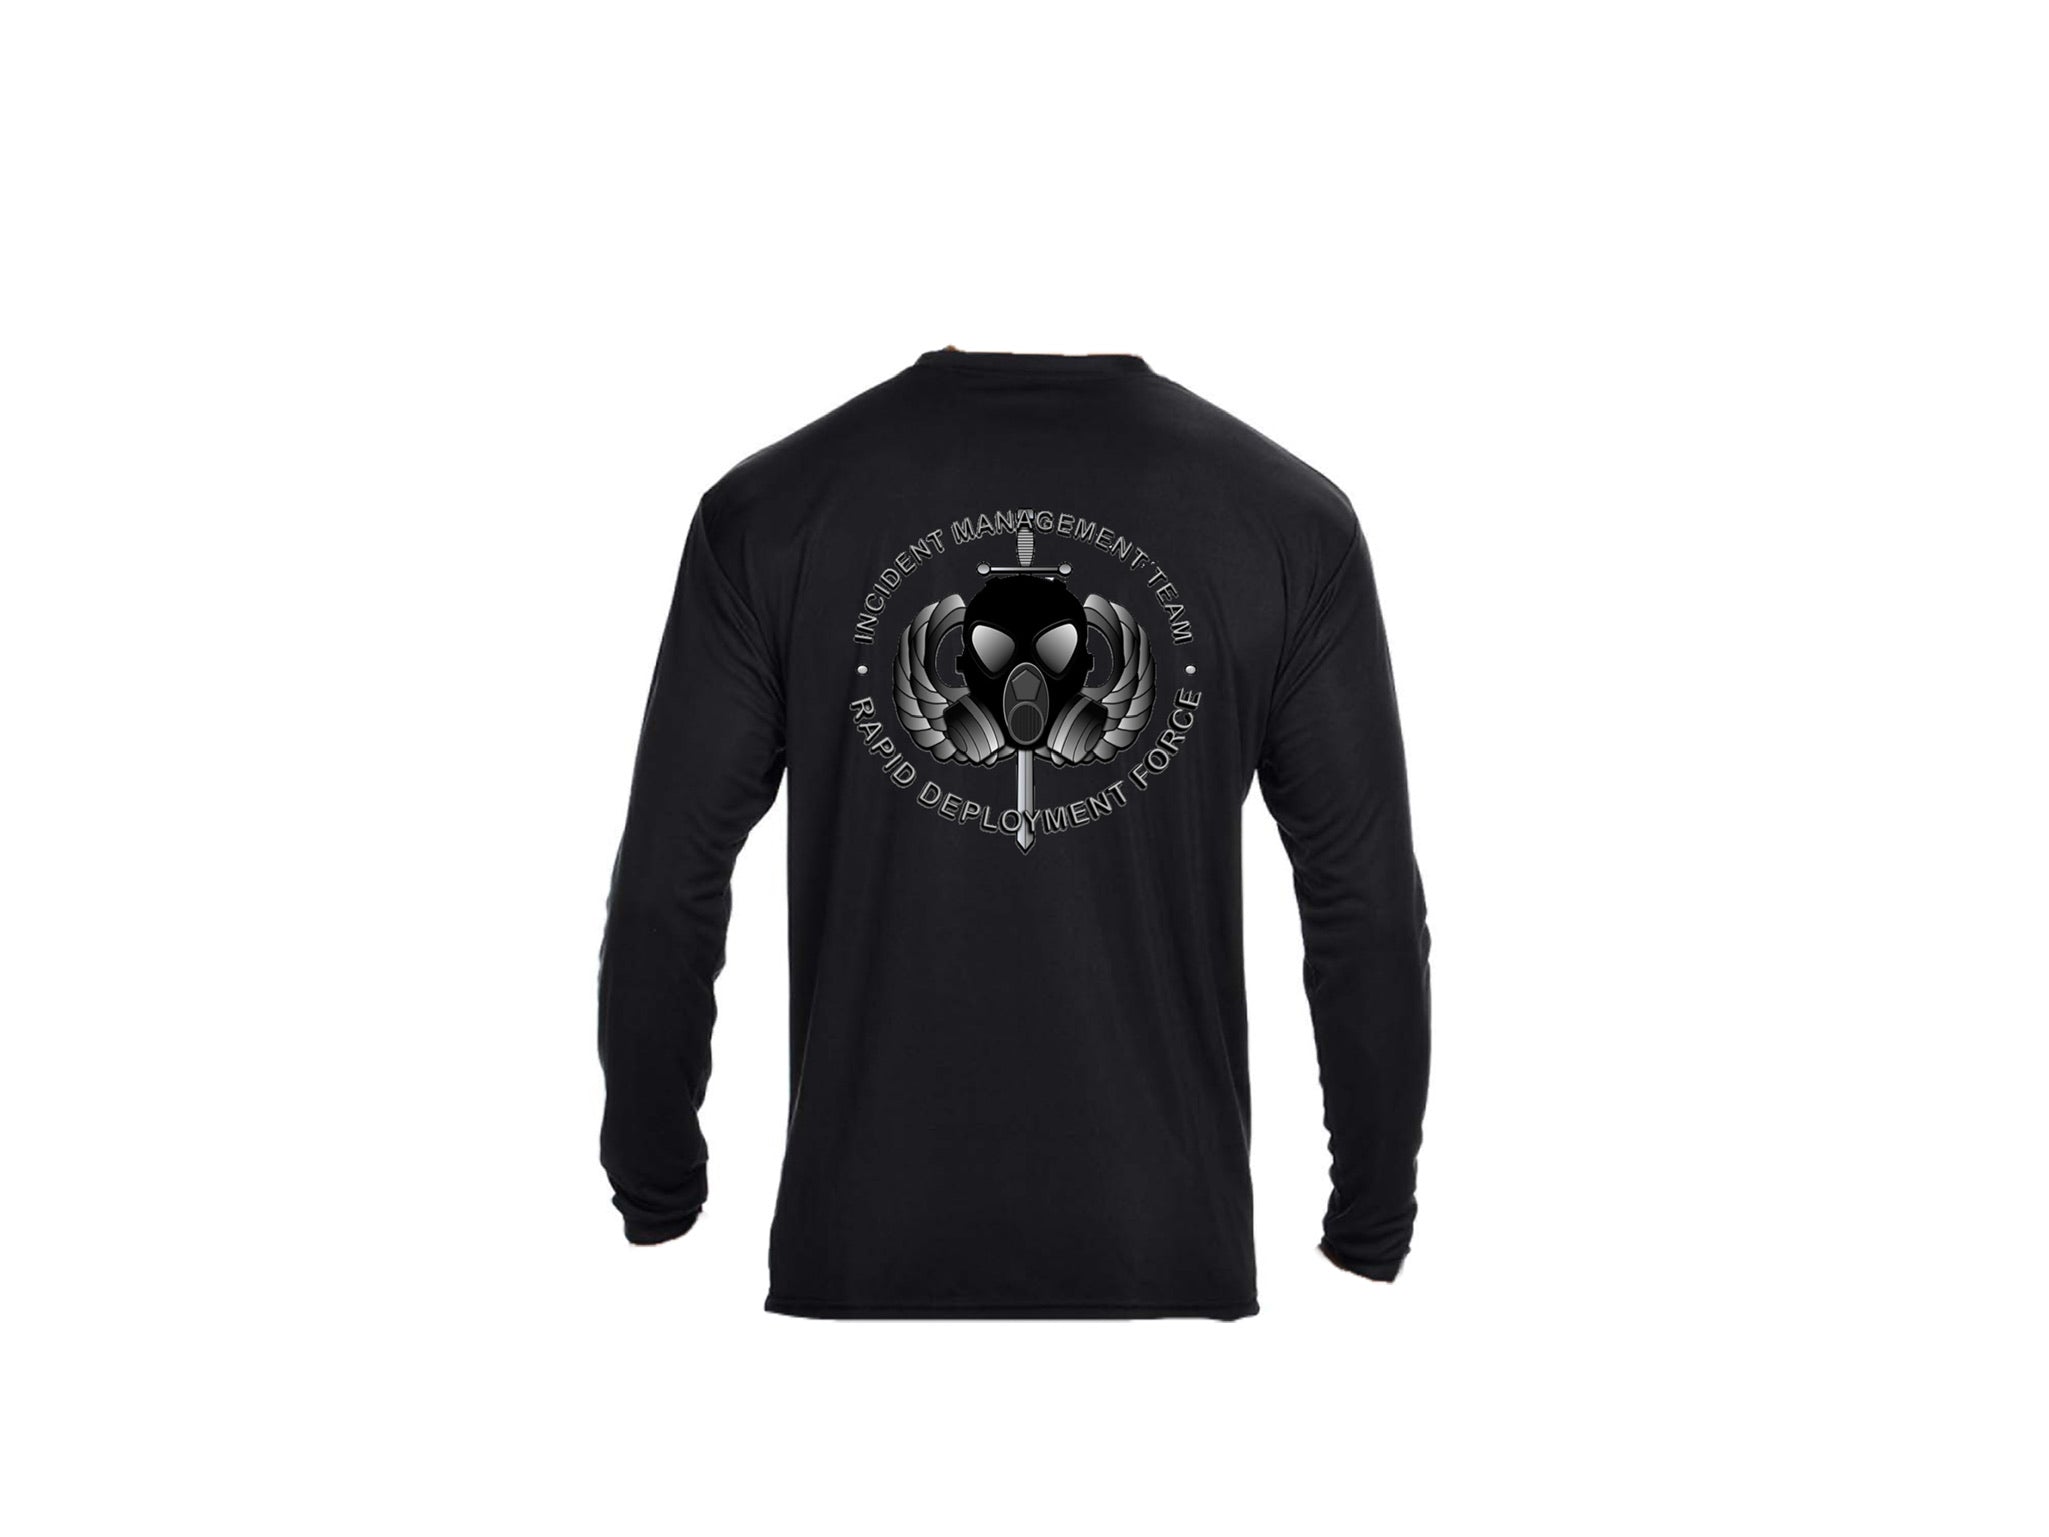 R.D.F. Cooling Performance Long Sleeve Tee